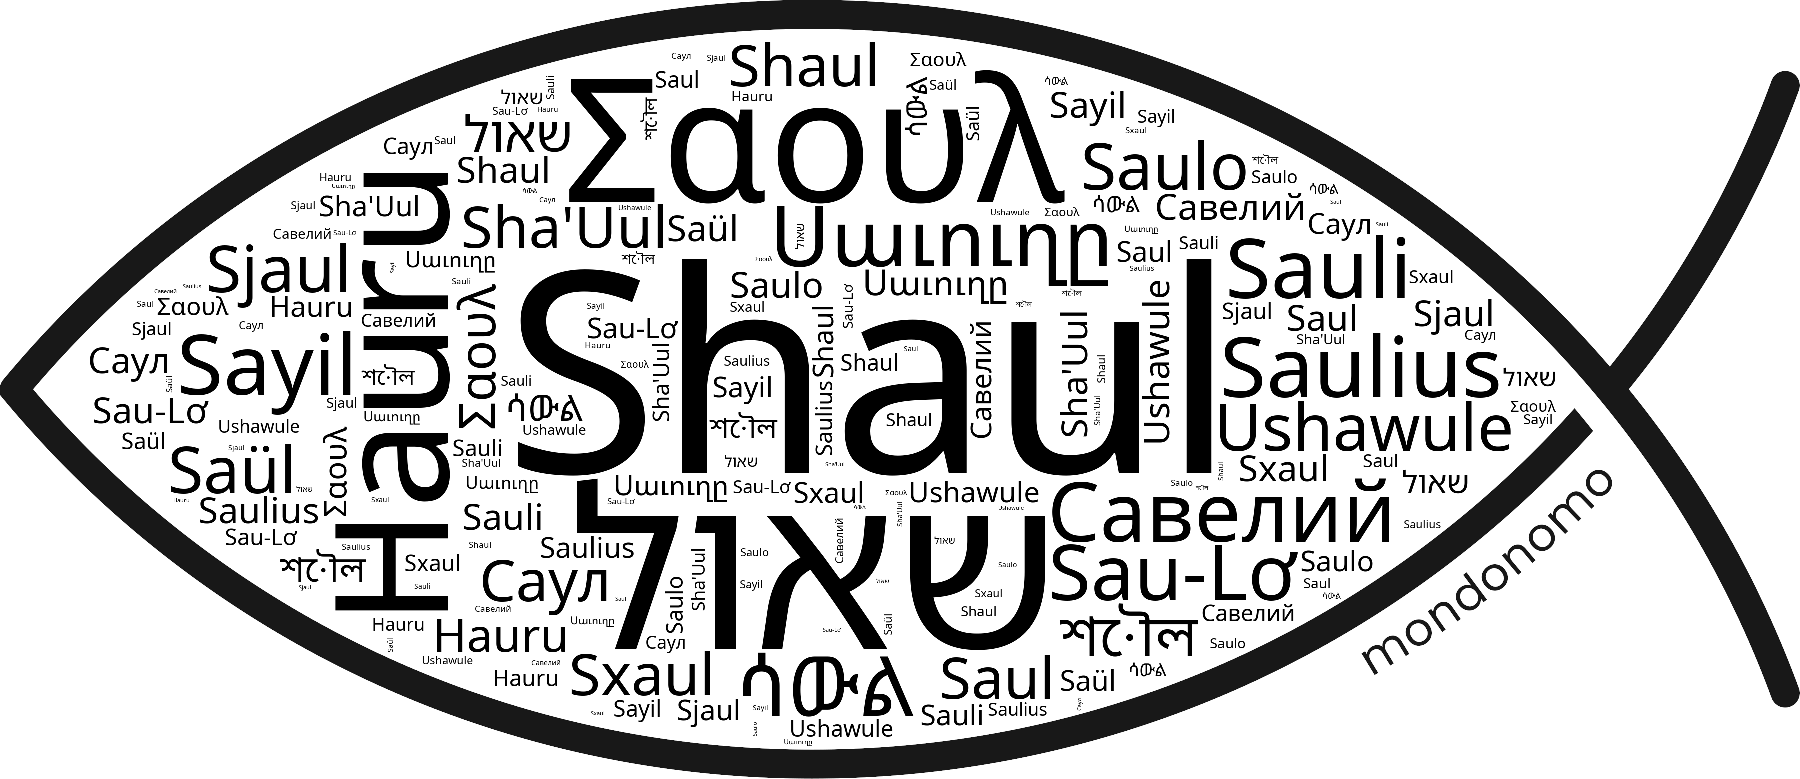 Name Shaul in the world's Bibles